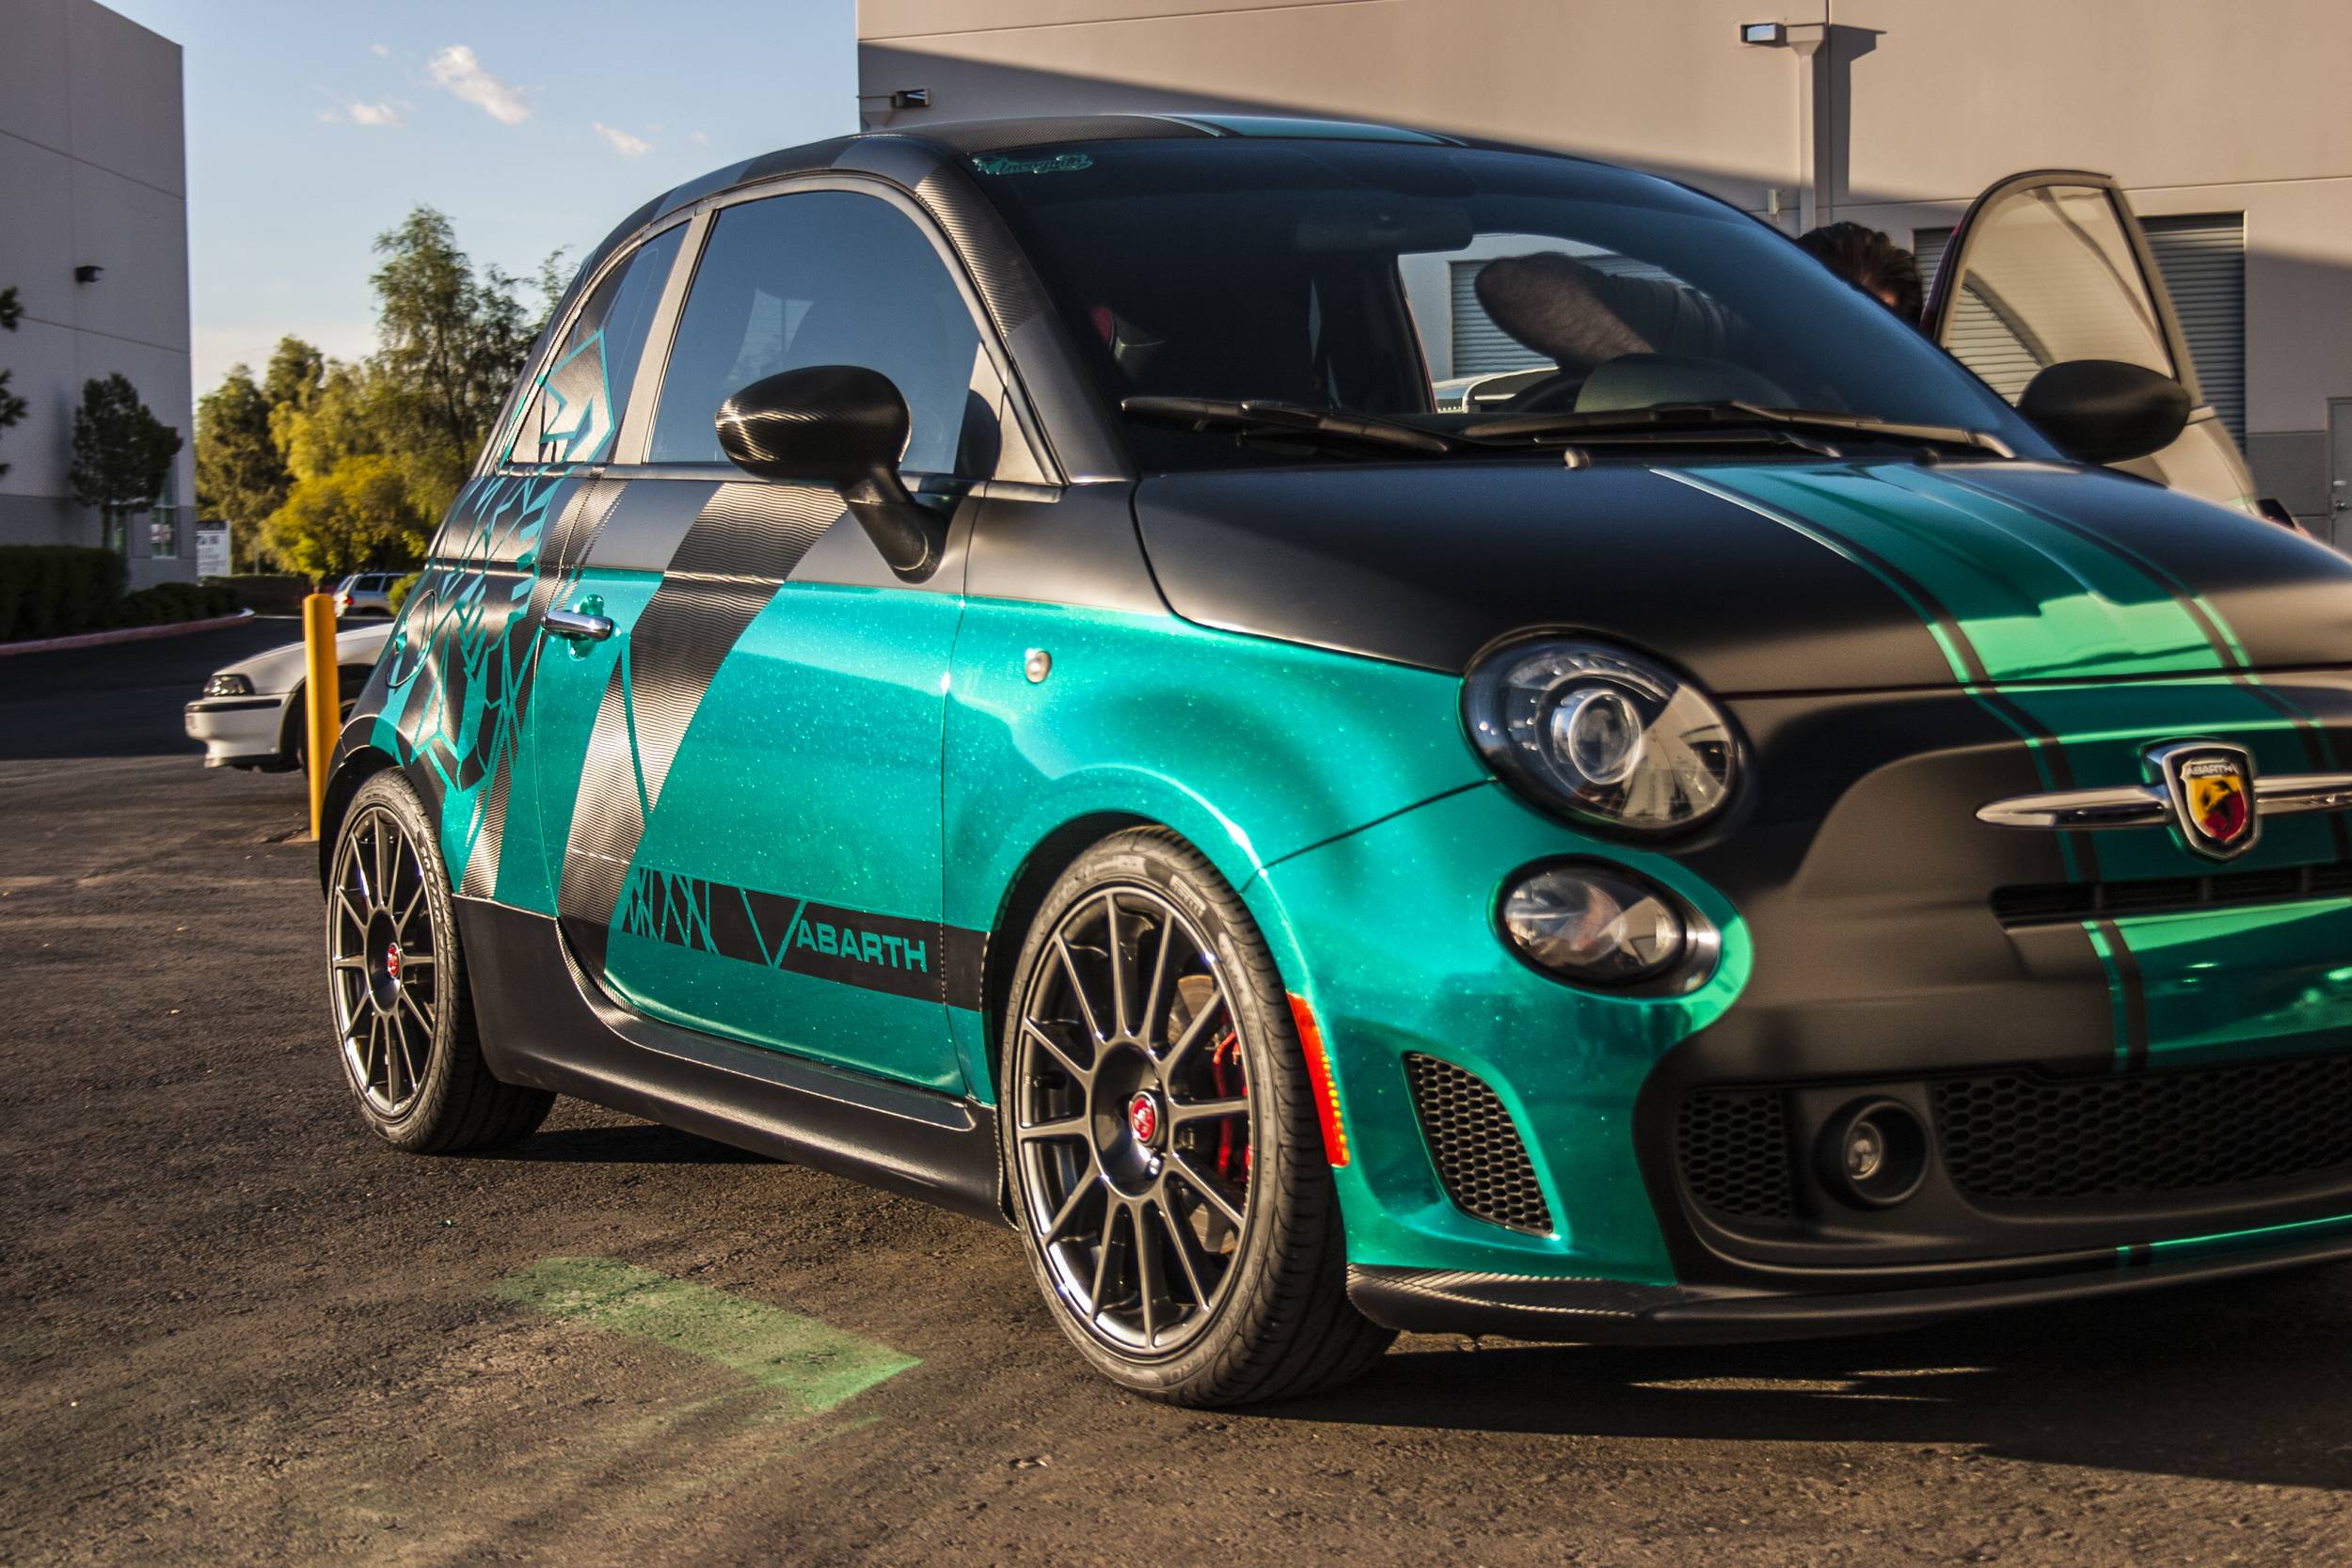 This week's customer car is this custom wrapped Fiat 500 Abarth